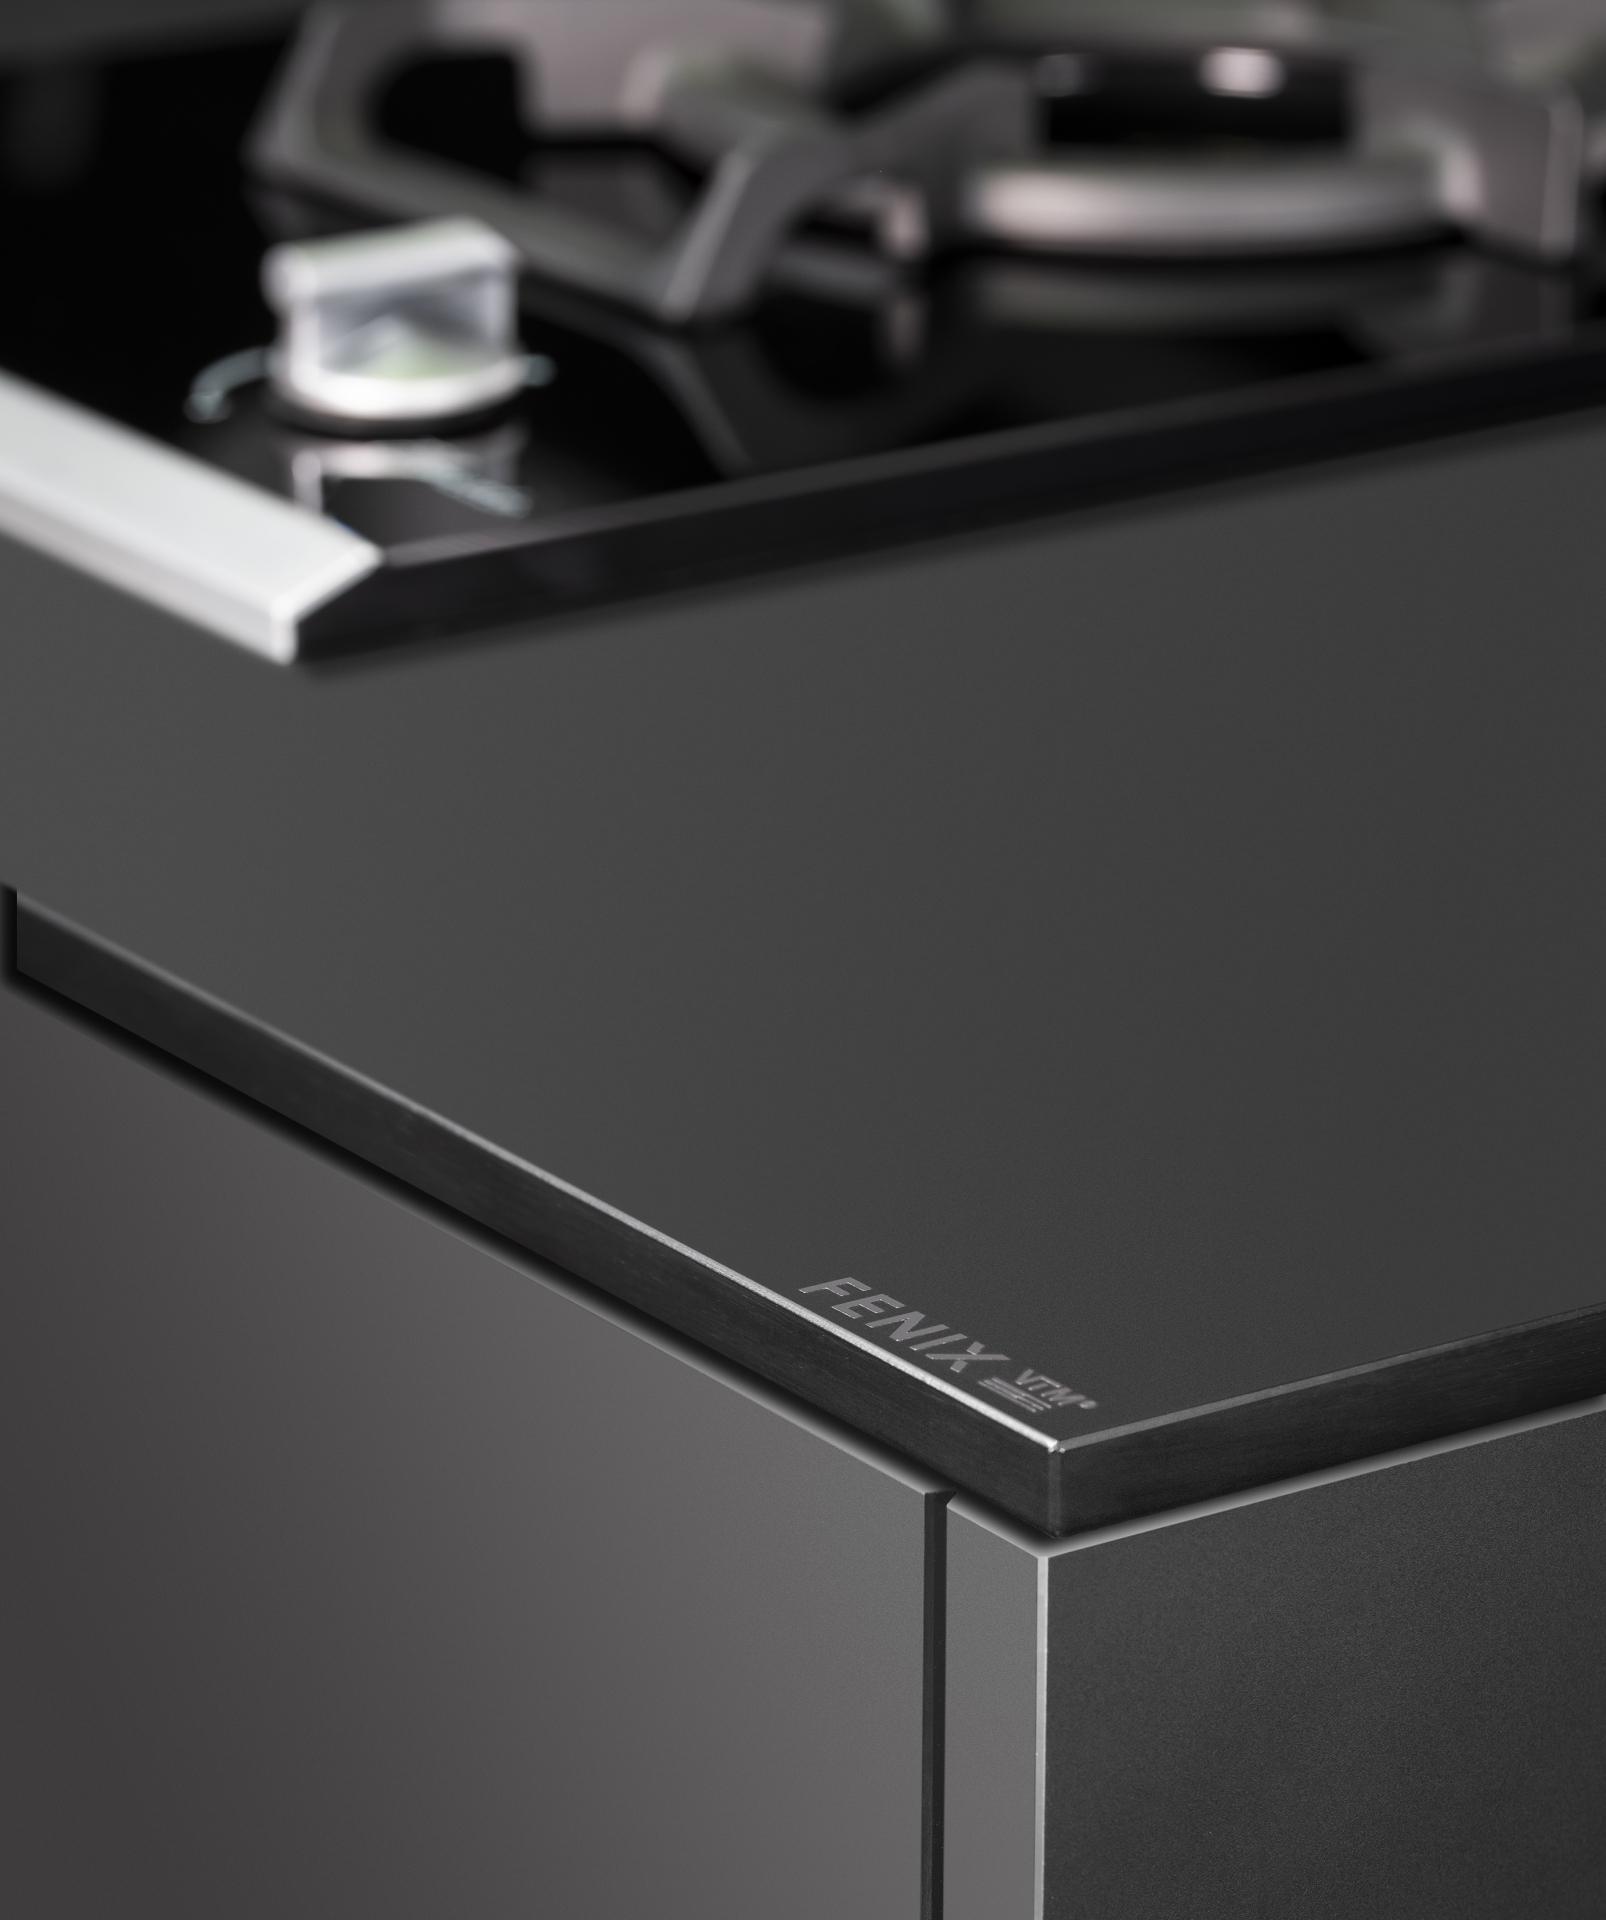 Mia Cucina Blends Form and Function in Versatile Cabinet Solutions